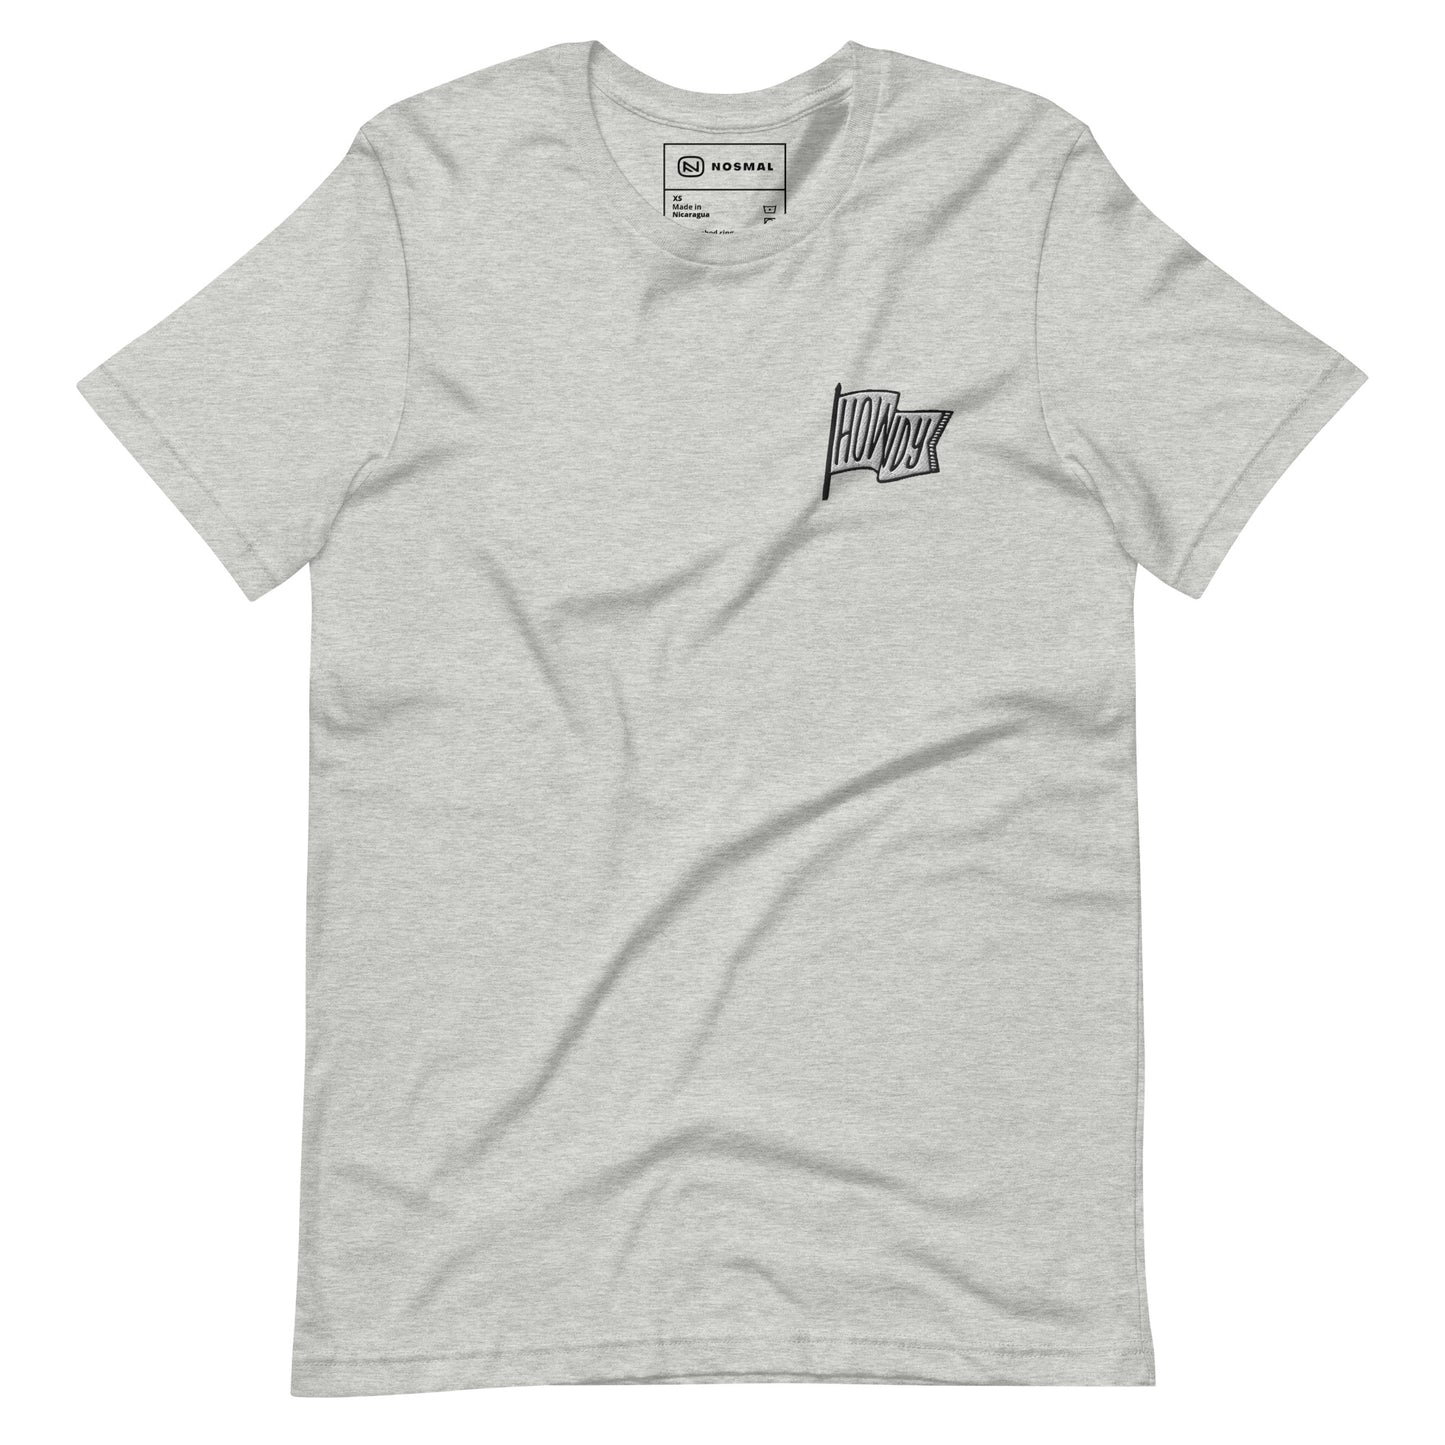 Straight on view of howdy embroidered design on heather athletic grey unisex t-shirt.